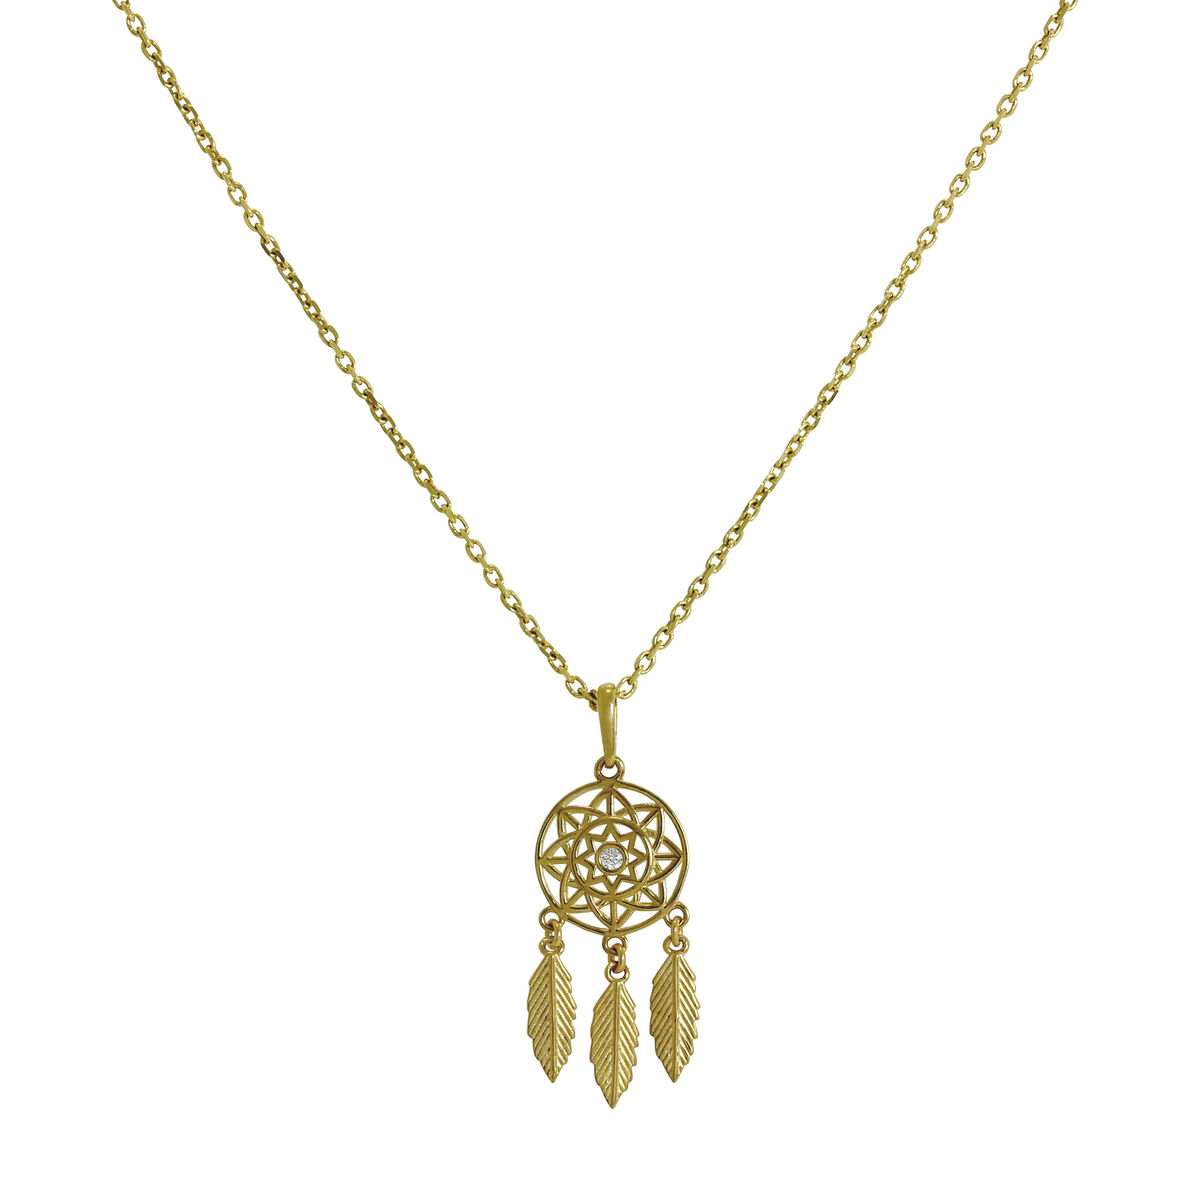 Buy Dreamcatcher Necklace Gold Silver Authentic Necklace Gift for Her Good  Luck Large Boho Dream Catcher Pendant Beautiful Rose Jewelry Online in  India - Etsy